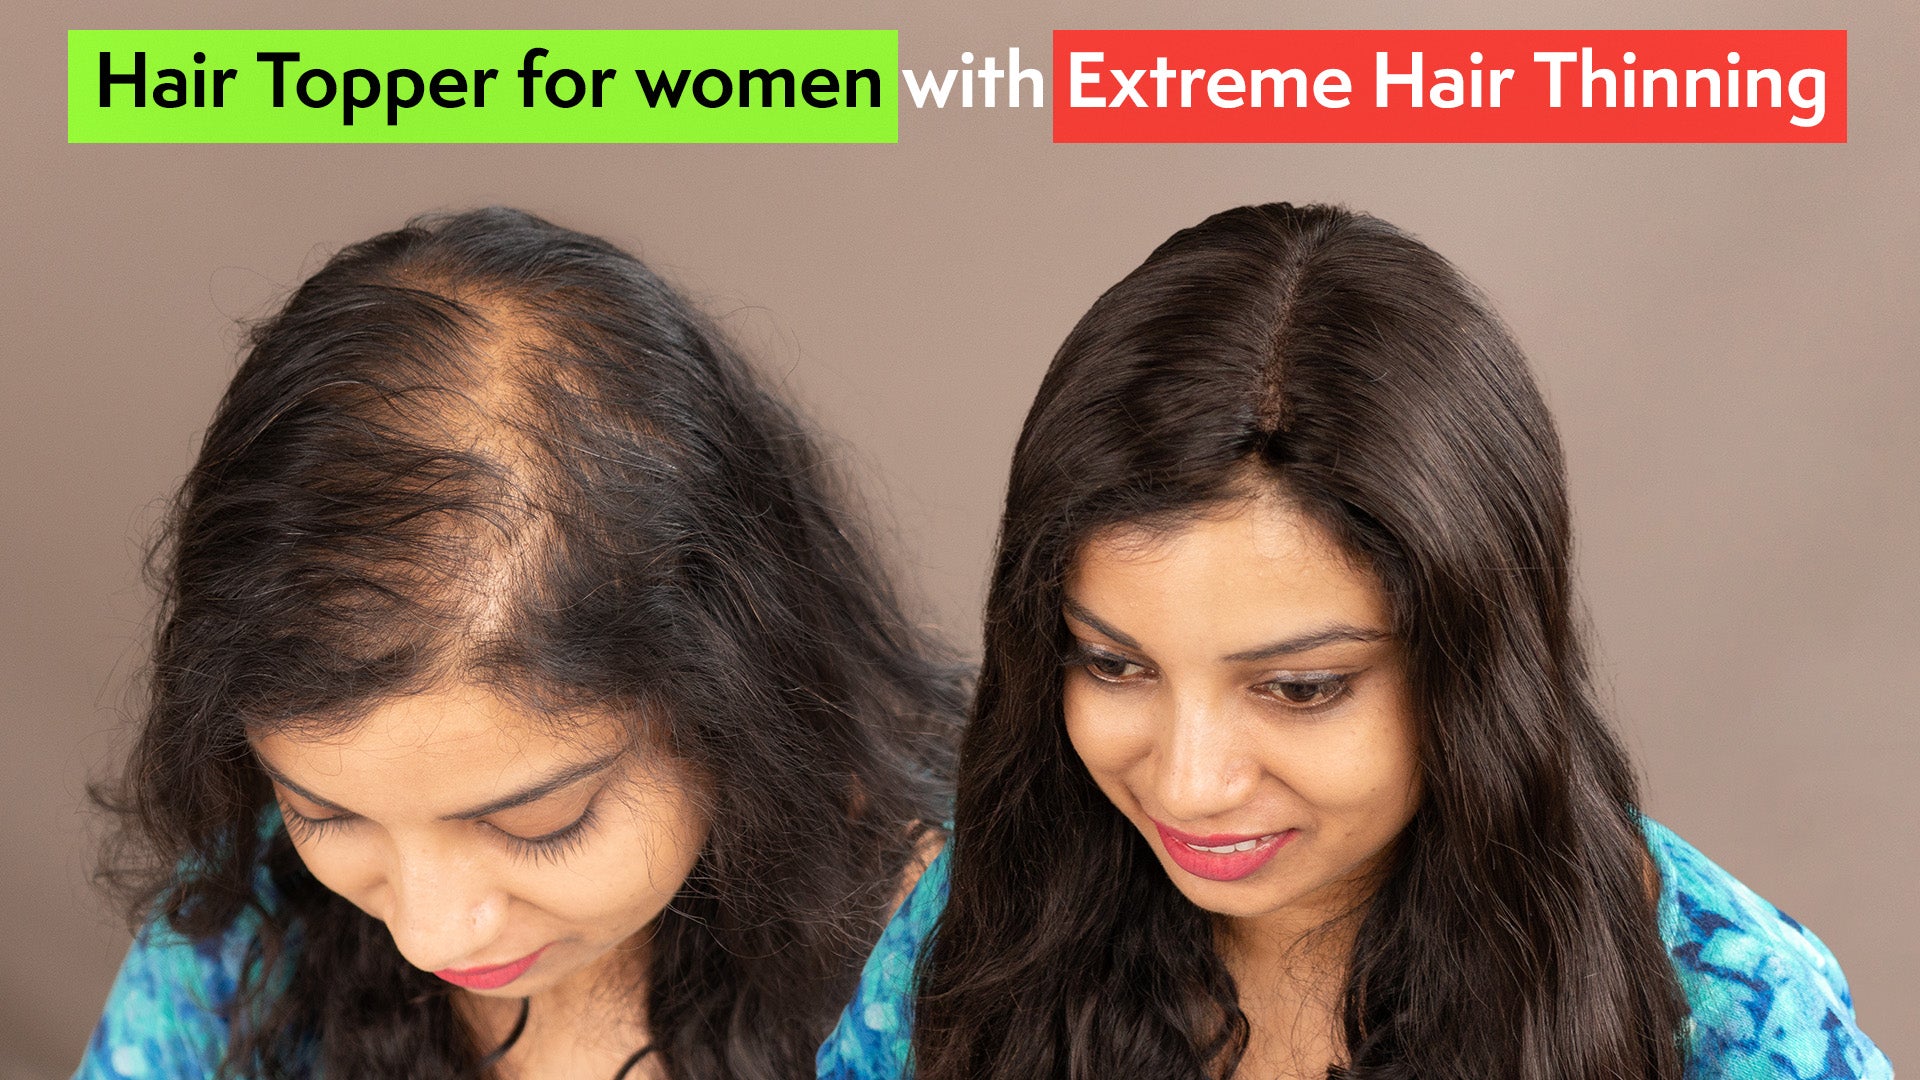 Hair Topper for women with extreme hair thinning